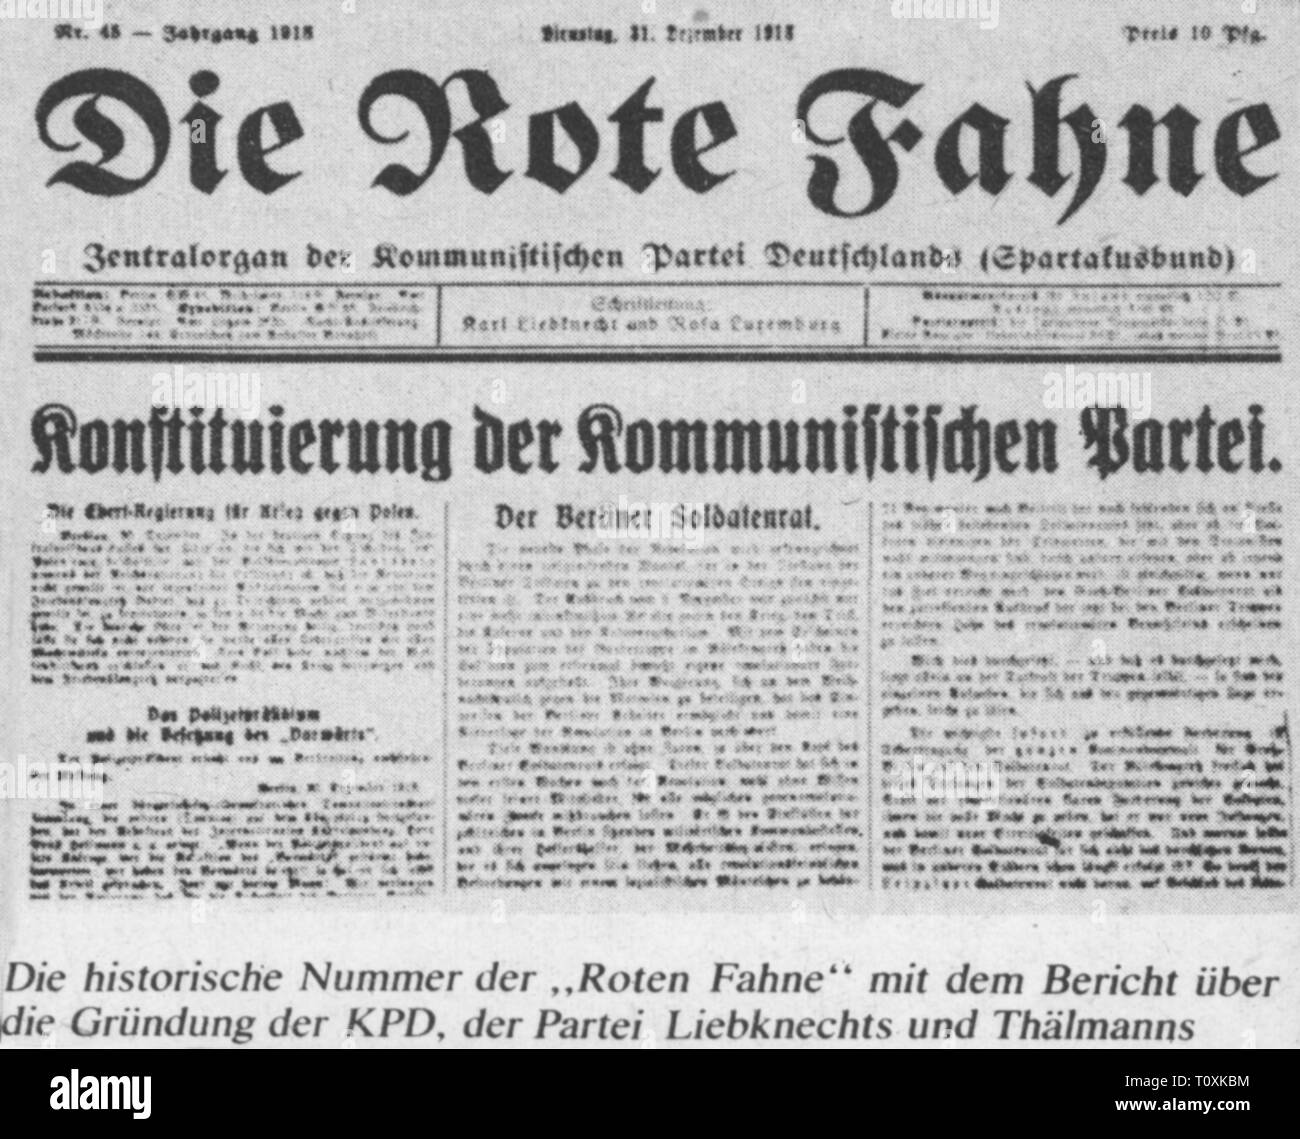 Presse/Medien, Zeitschriften, 'Die Rote Fahne" (Die Rote Fahne), vordere Seite, 1.Band, Nummer 45, Berlin, 31.12.1918, Additional-Rights - Clearance-Info - Not-Available Stockfoto